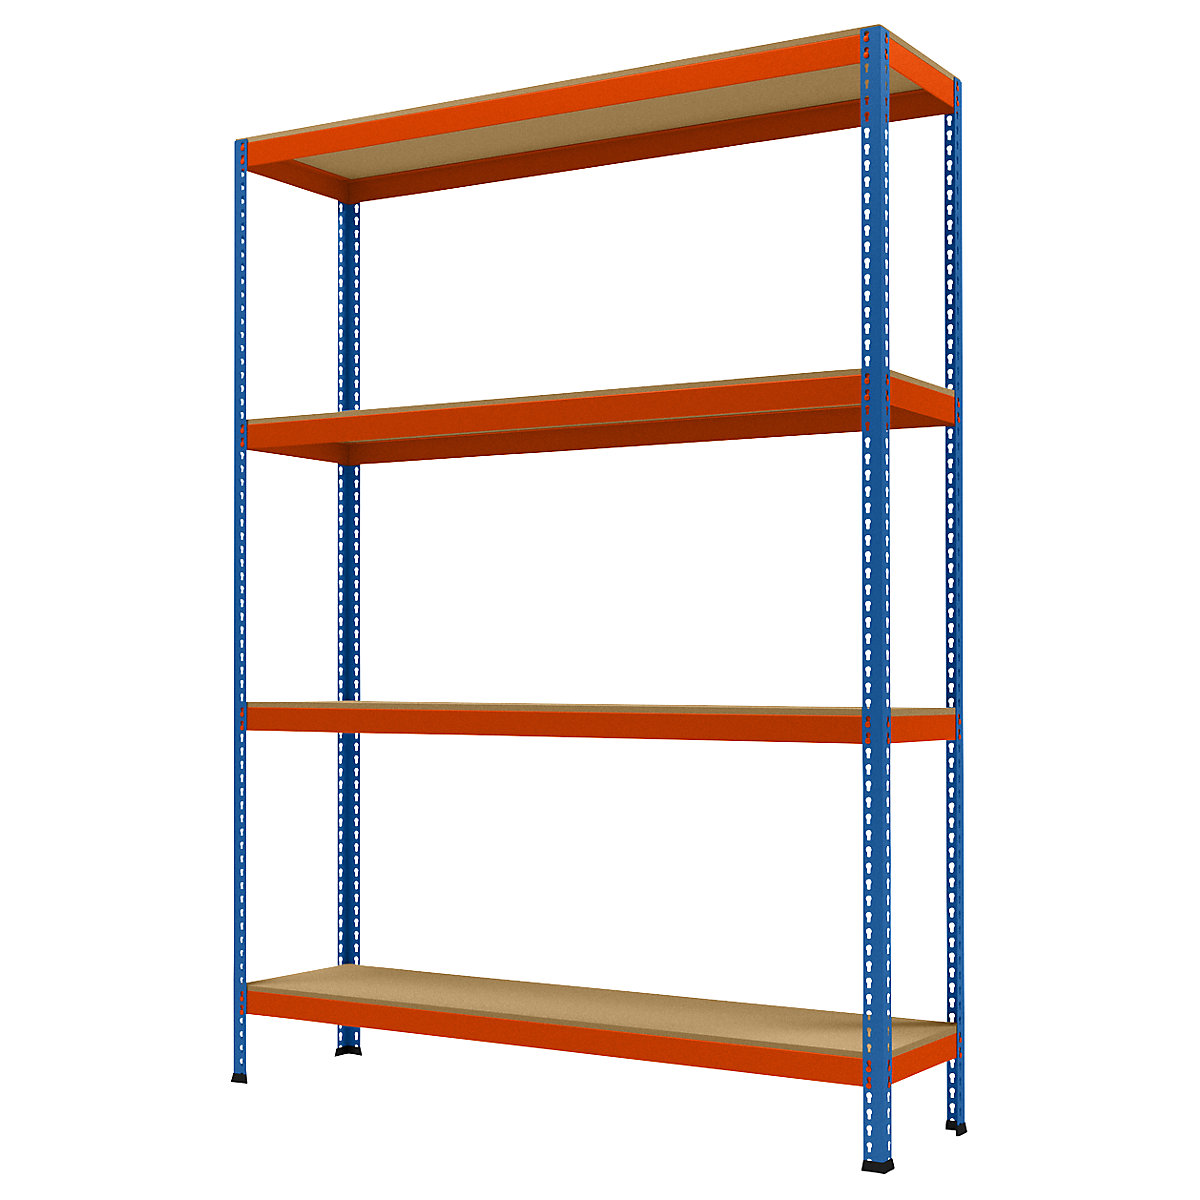 Wide span heavy duty shelving, height 2438 mm, overall depth 468 mm, width 1841 mm